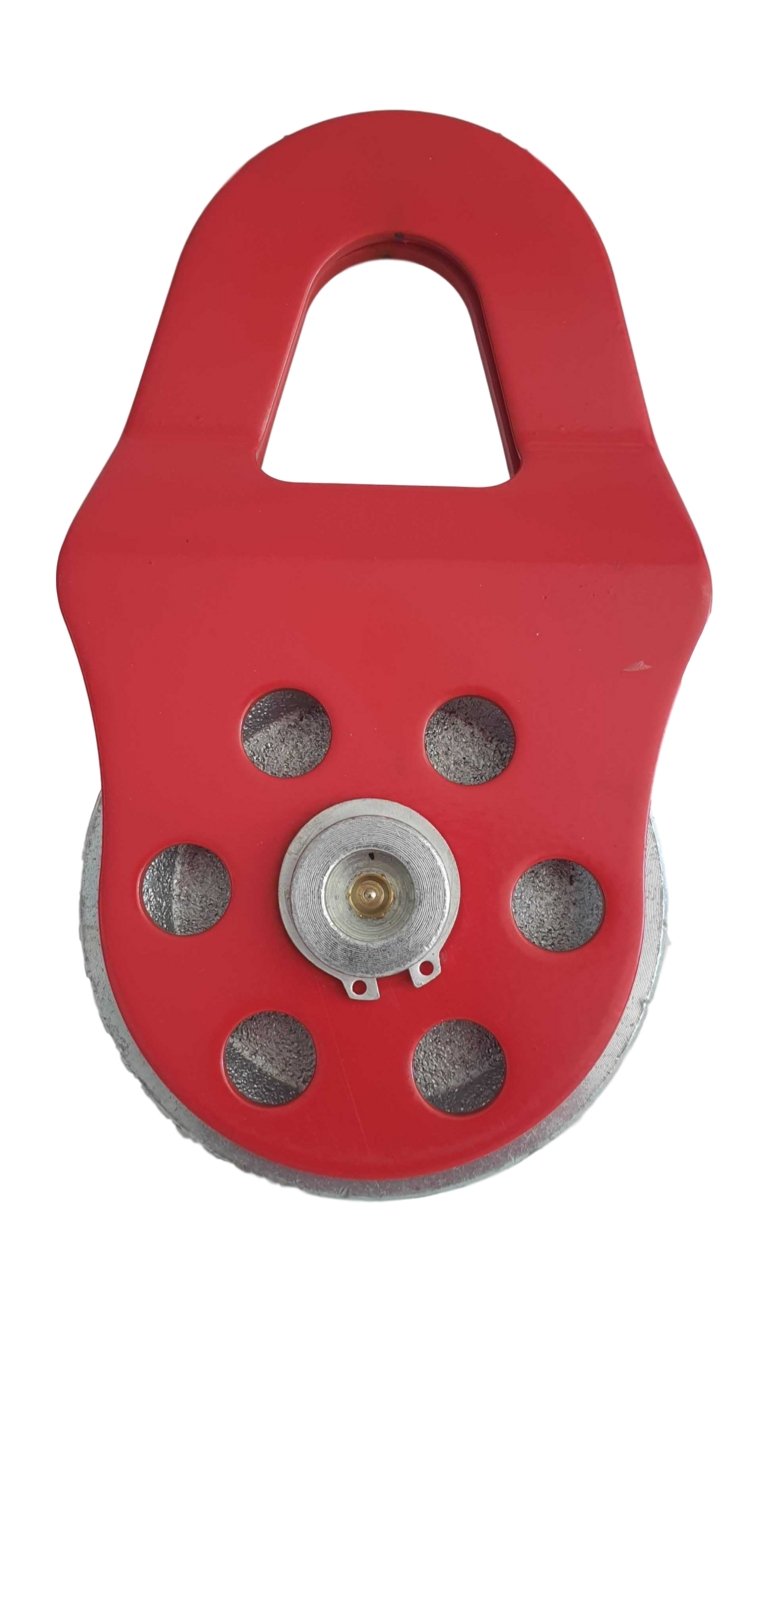 Carbon Offroad - Carbon Offroad 8 Tonne Snatch block pulley V2 - 4X4OC™ | 4x4 Offroad Centre